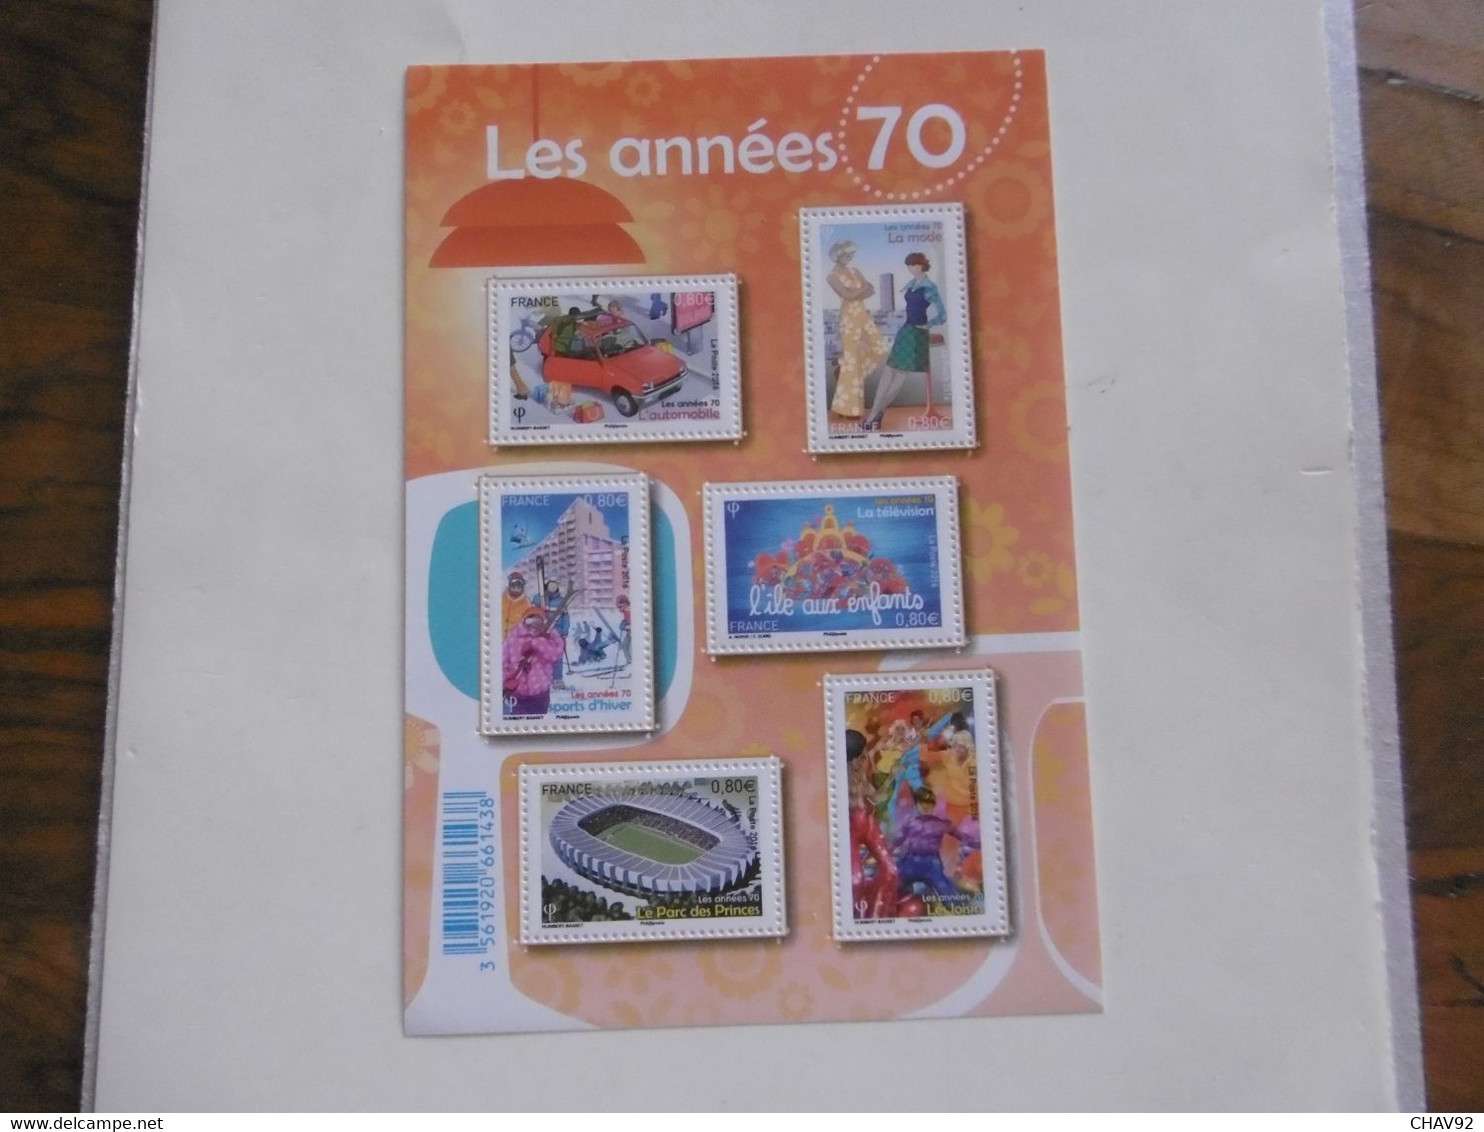 FRANCE 2016  F5056 * *    LES ANNEES 70 - Mint/Hinged